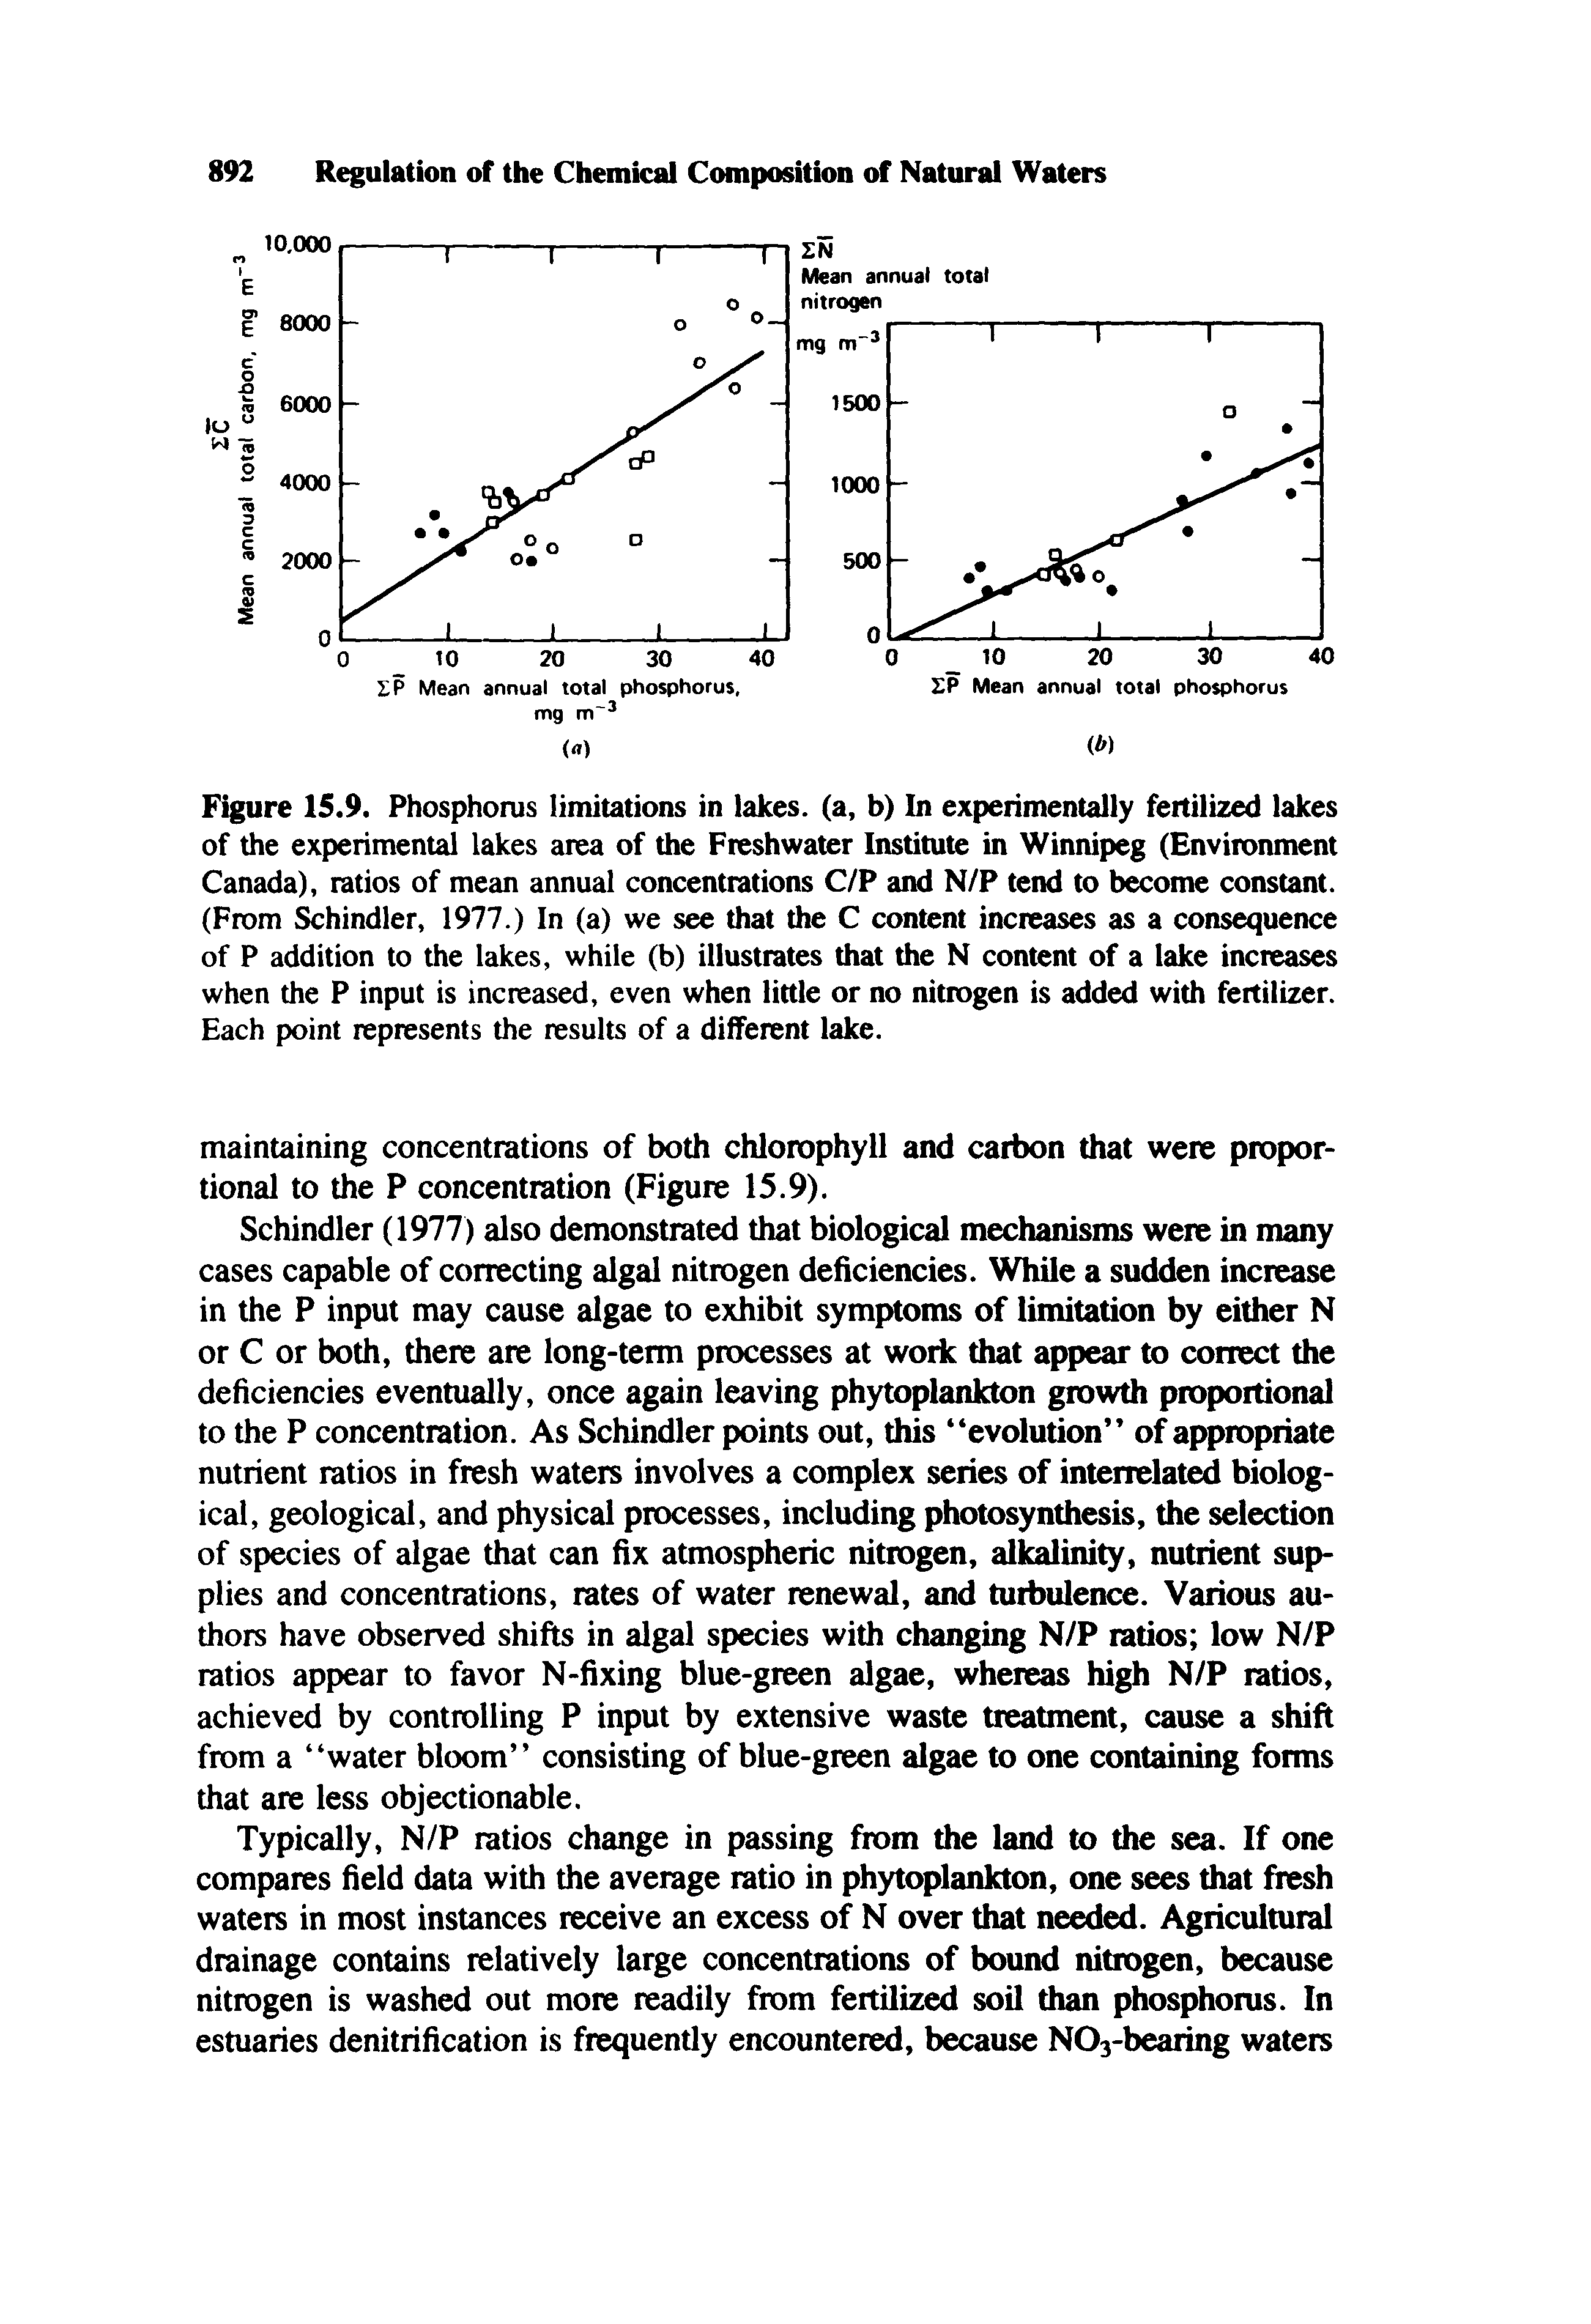 Figure 15.9. Phosphorus limitations in lakes, (a, b) In experimentally fertilized lakes of the experimental lakes area of the Freshwater Institute in Winnipeg (Environment Canada), ratios of mean annual concentrations C/P and N/P tend to become constant. (From Schindler, 1977.) In (a) we see that the C content increases as a consequence of P addition to the lakes, while (b) illustrates that the N content of a lake increases when the P input is increased, even when little or no nitrogen is added with fertilizer. Each point represents the results of a different lake.